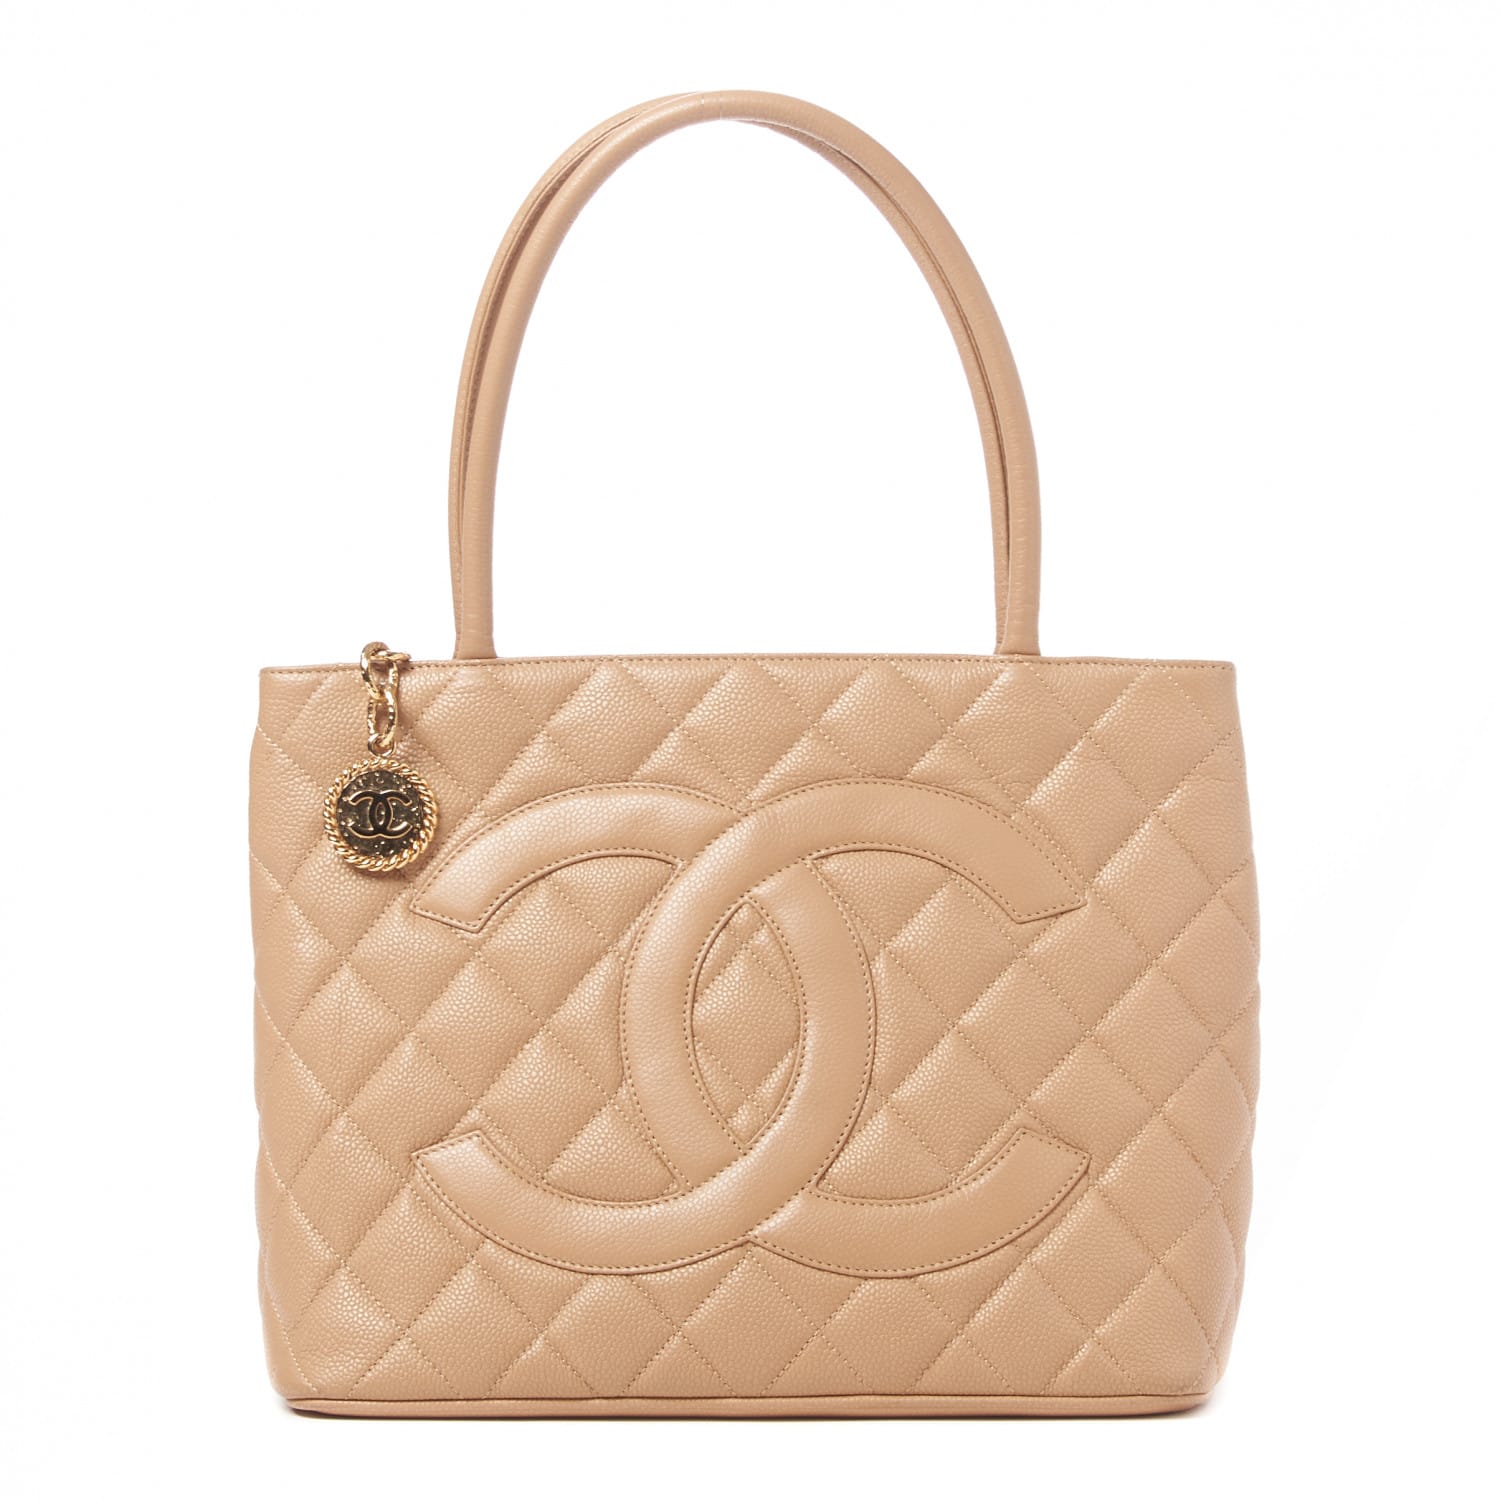 My first Chanel bag may be one worth a small down-payment. Advice needed.